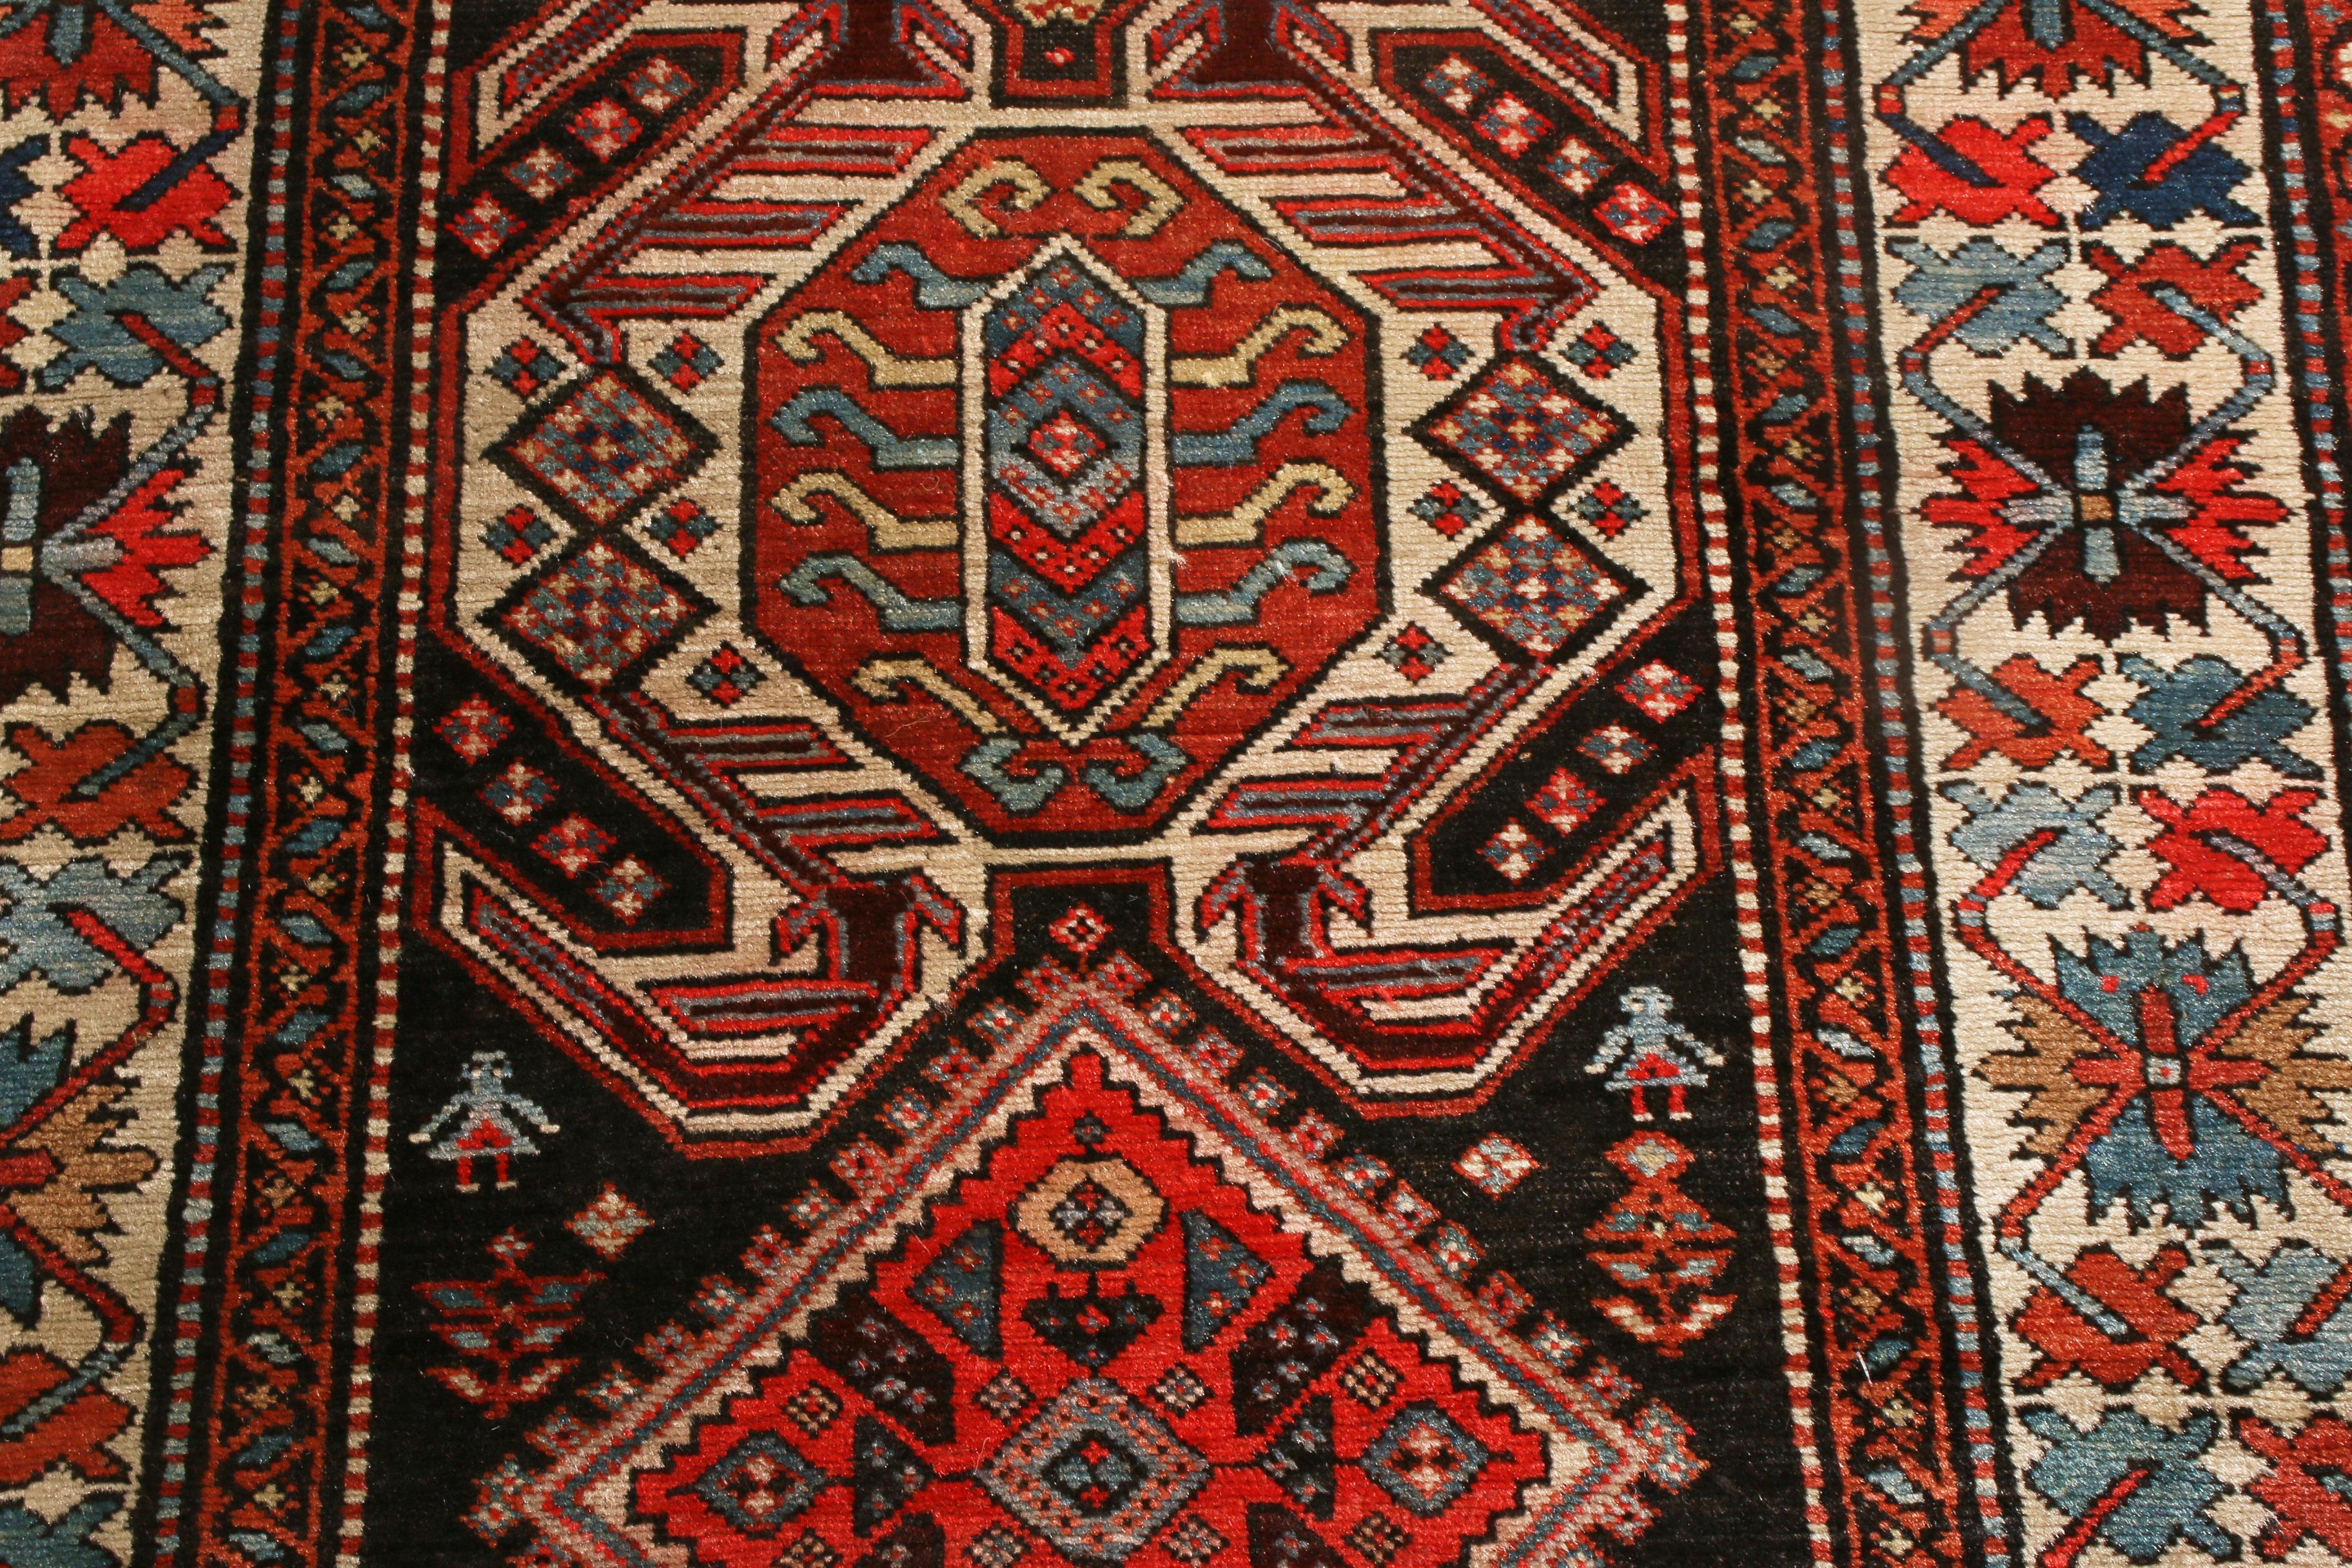 Antique Lankeran Red, Black and Beige Wool Rug by Rug & Kilim In Good Condition For Sale In Long Island City, NY